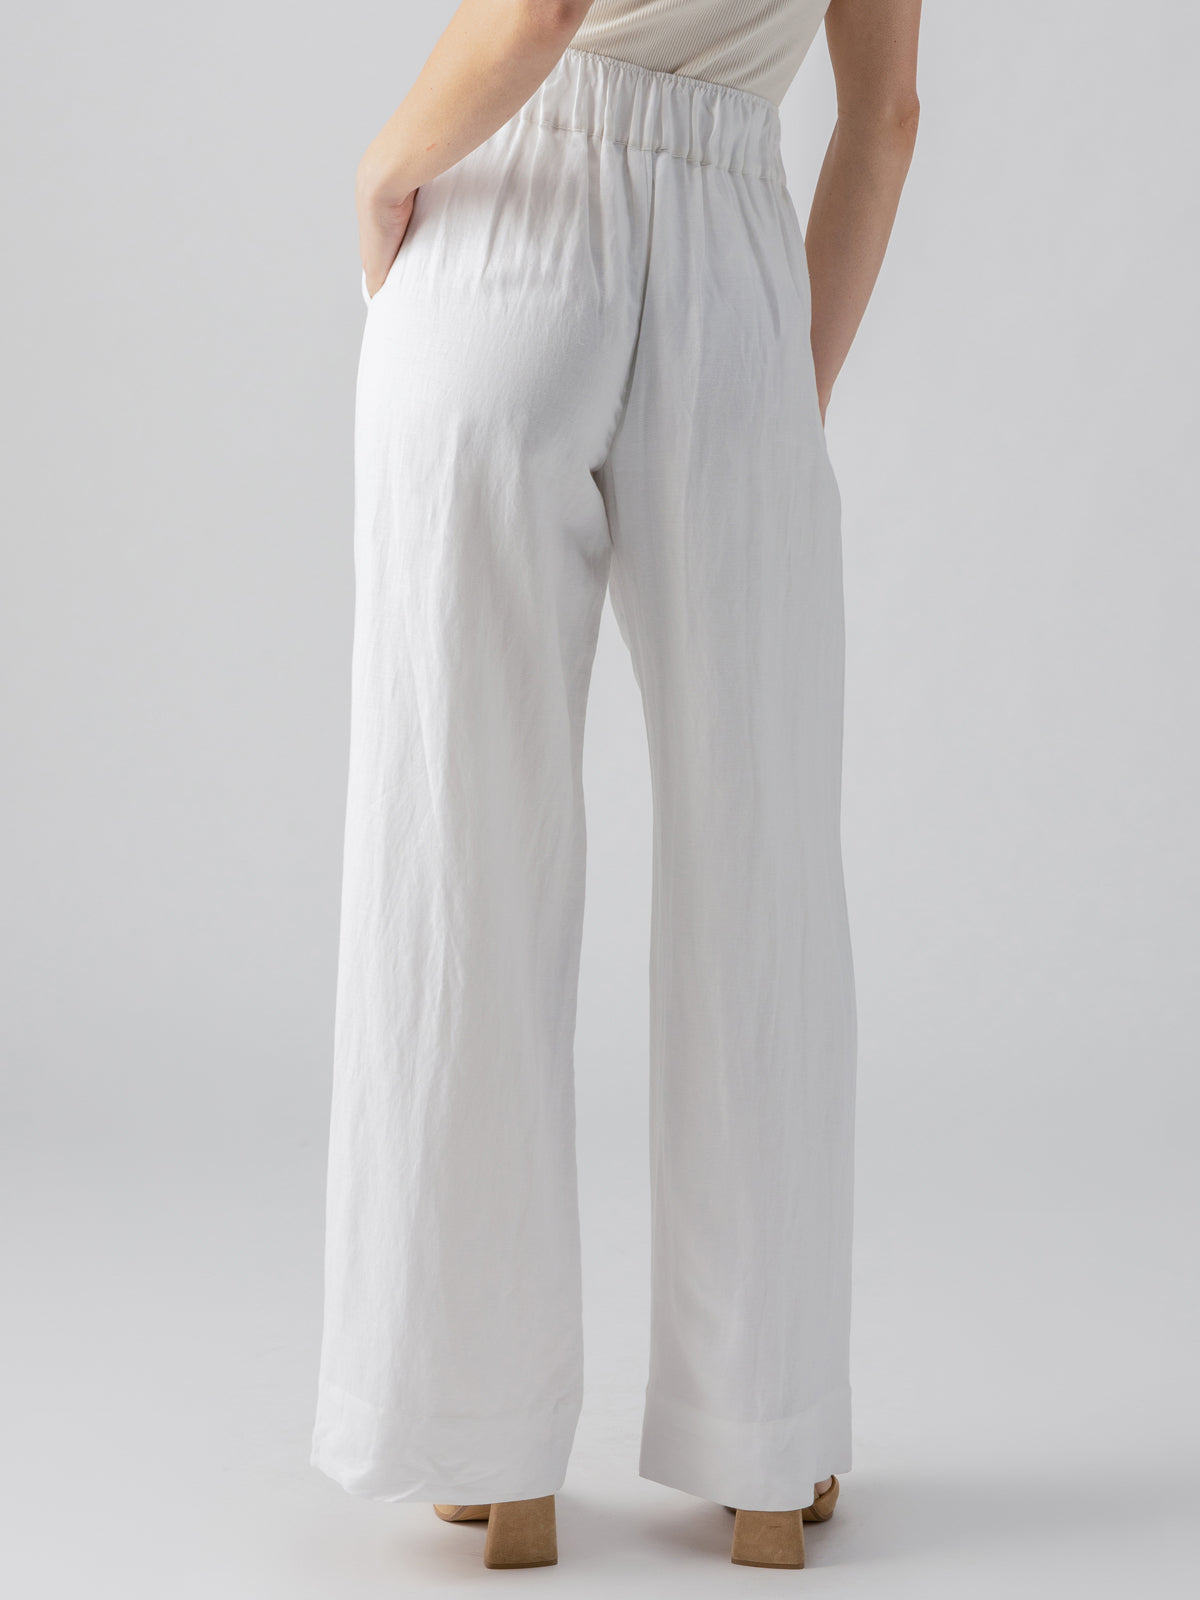 Pull Me On High Rise Pant White